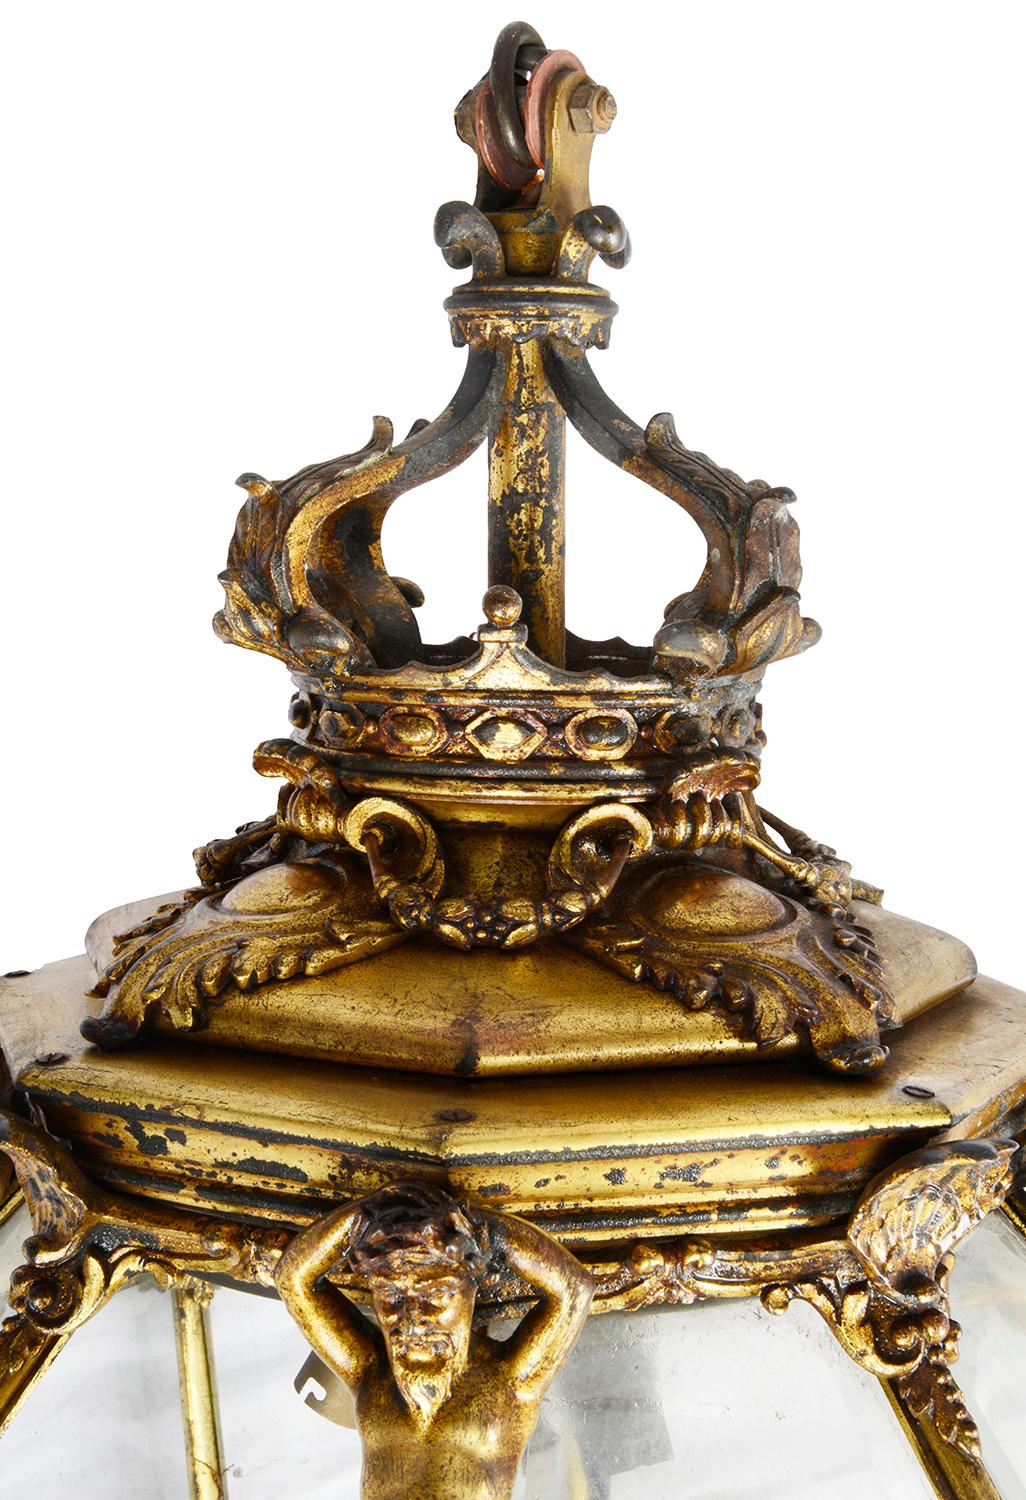 A very good quality 19th century French gilded ormolu hexagonal tapering lantern, having a crown coronet, sea shell and Neptune mounts, beveled glass panels, tapering down to a scrolling ormolu foliate finial. Measures: 98cm(39